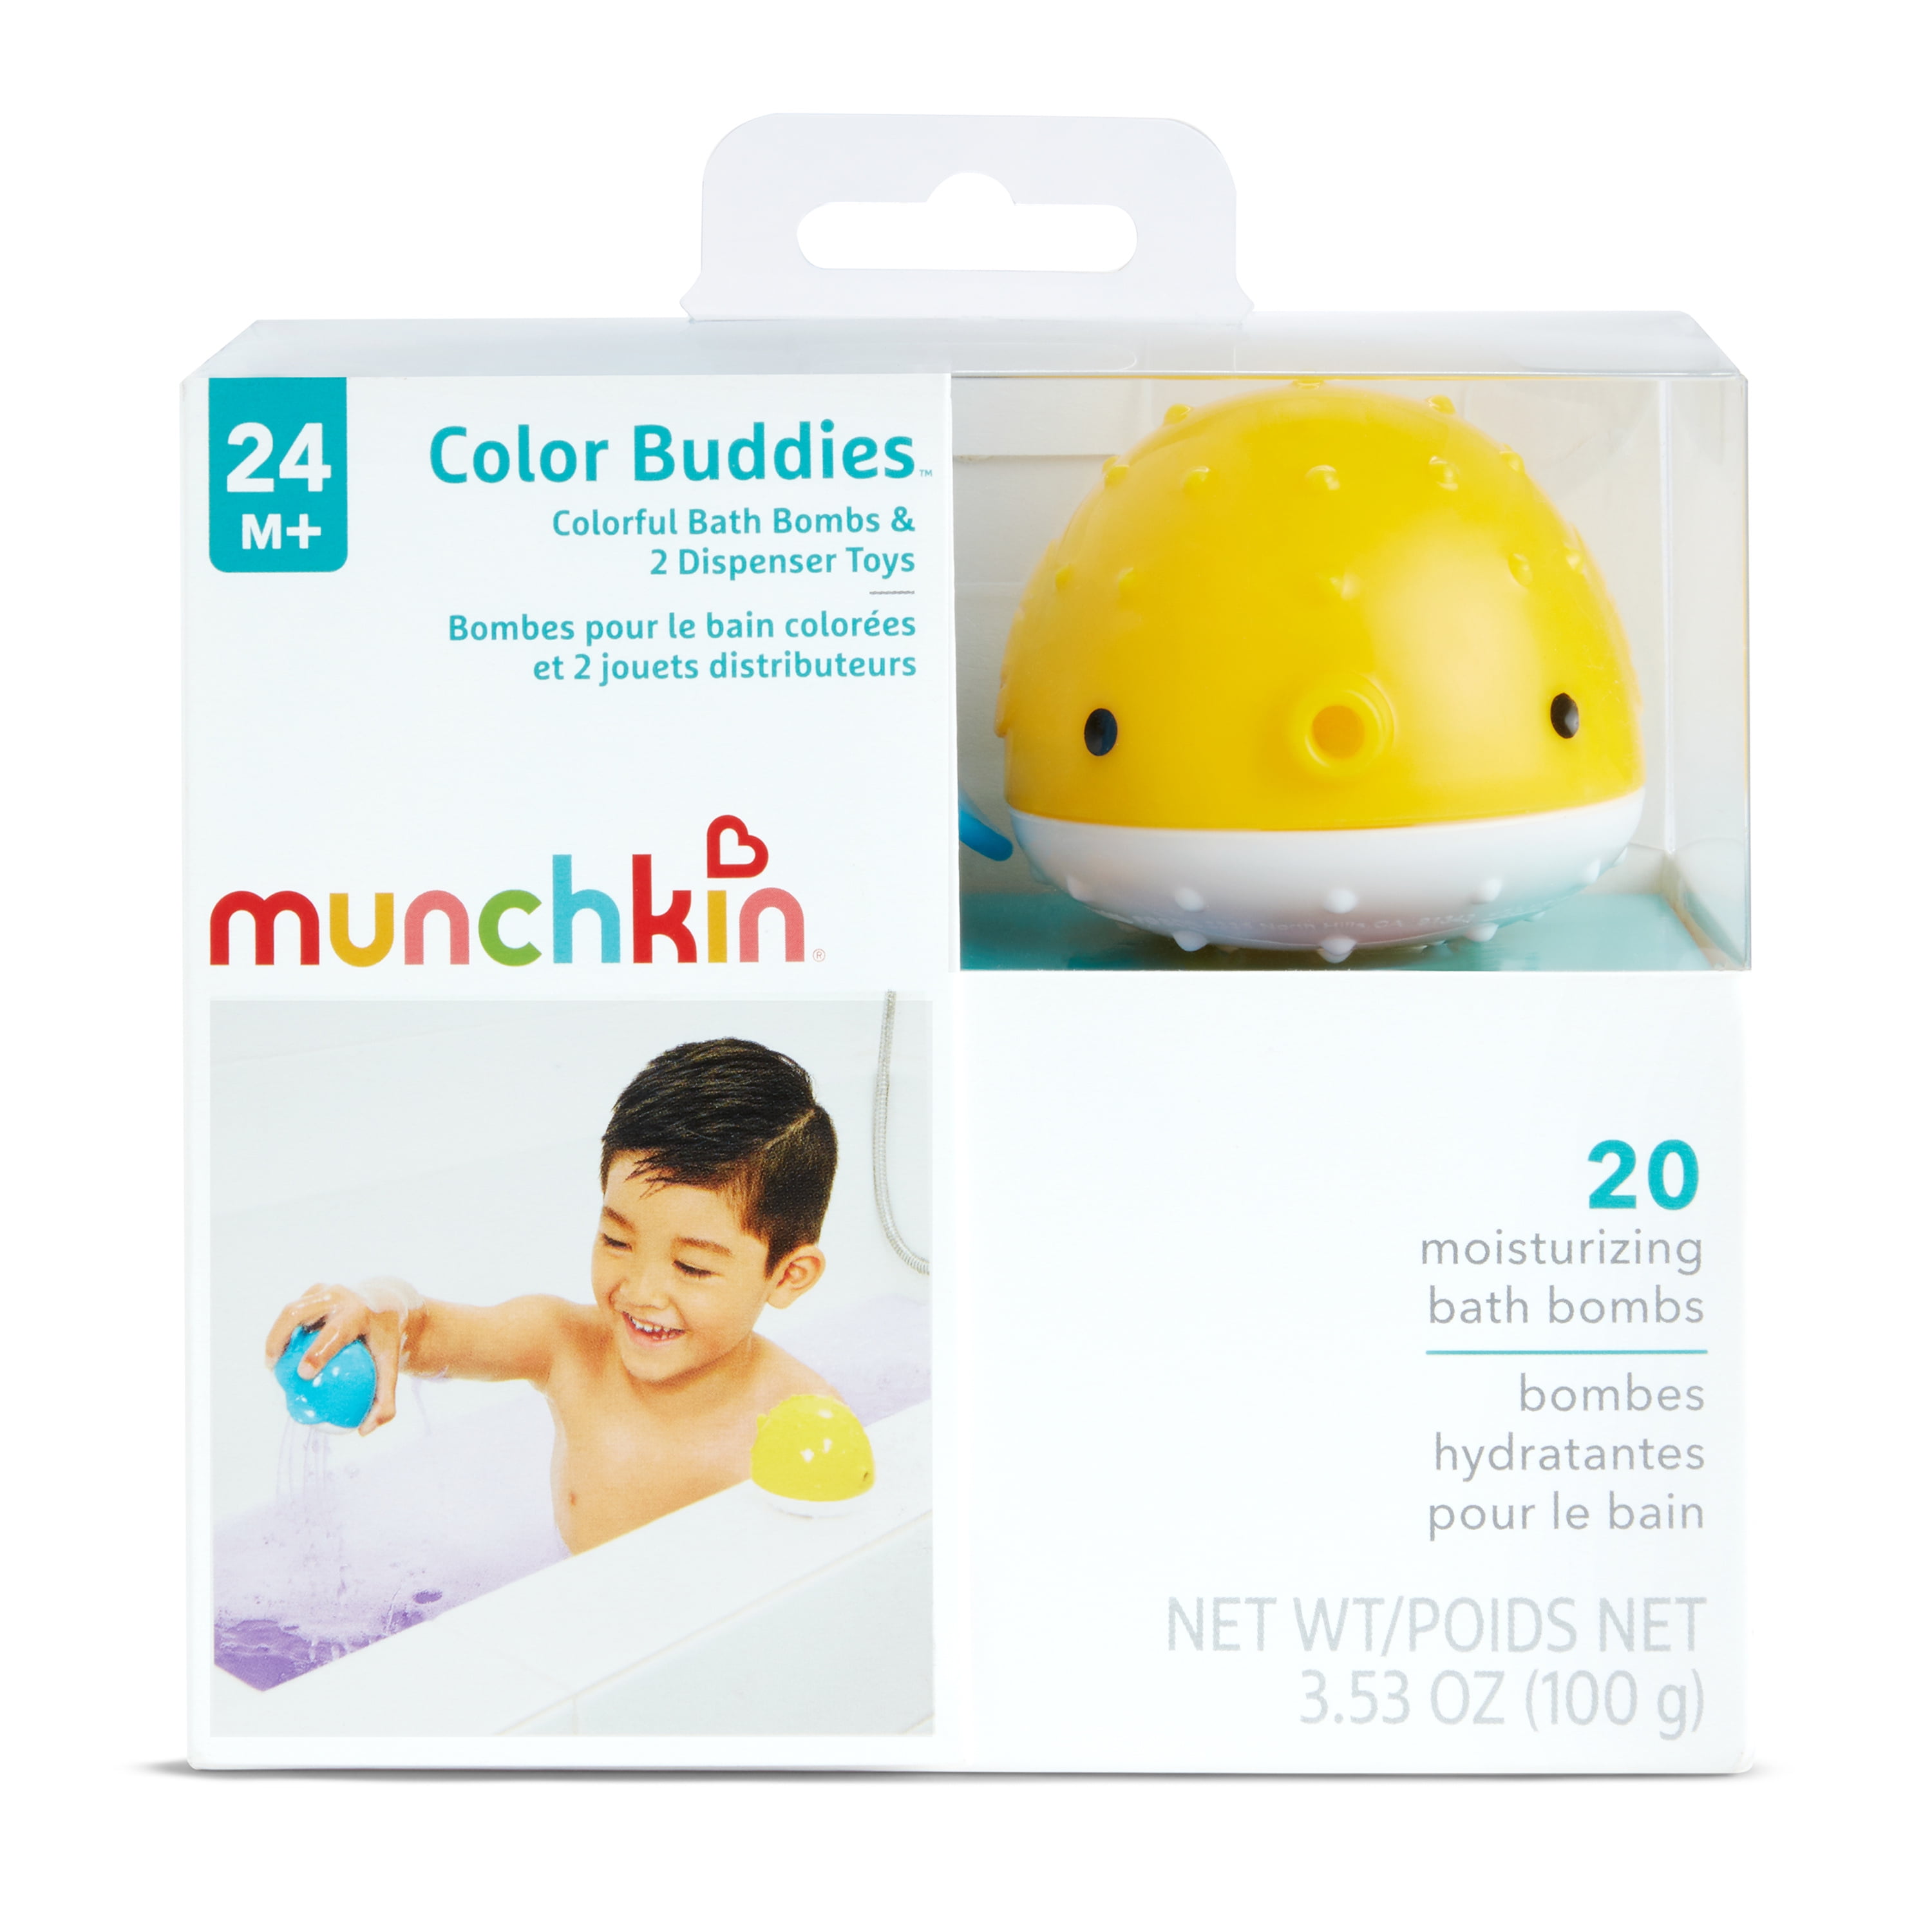 Munchkin munchkin color buddies moisturizing bath water color tablets & 2  toy dispensers, 20 tablets